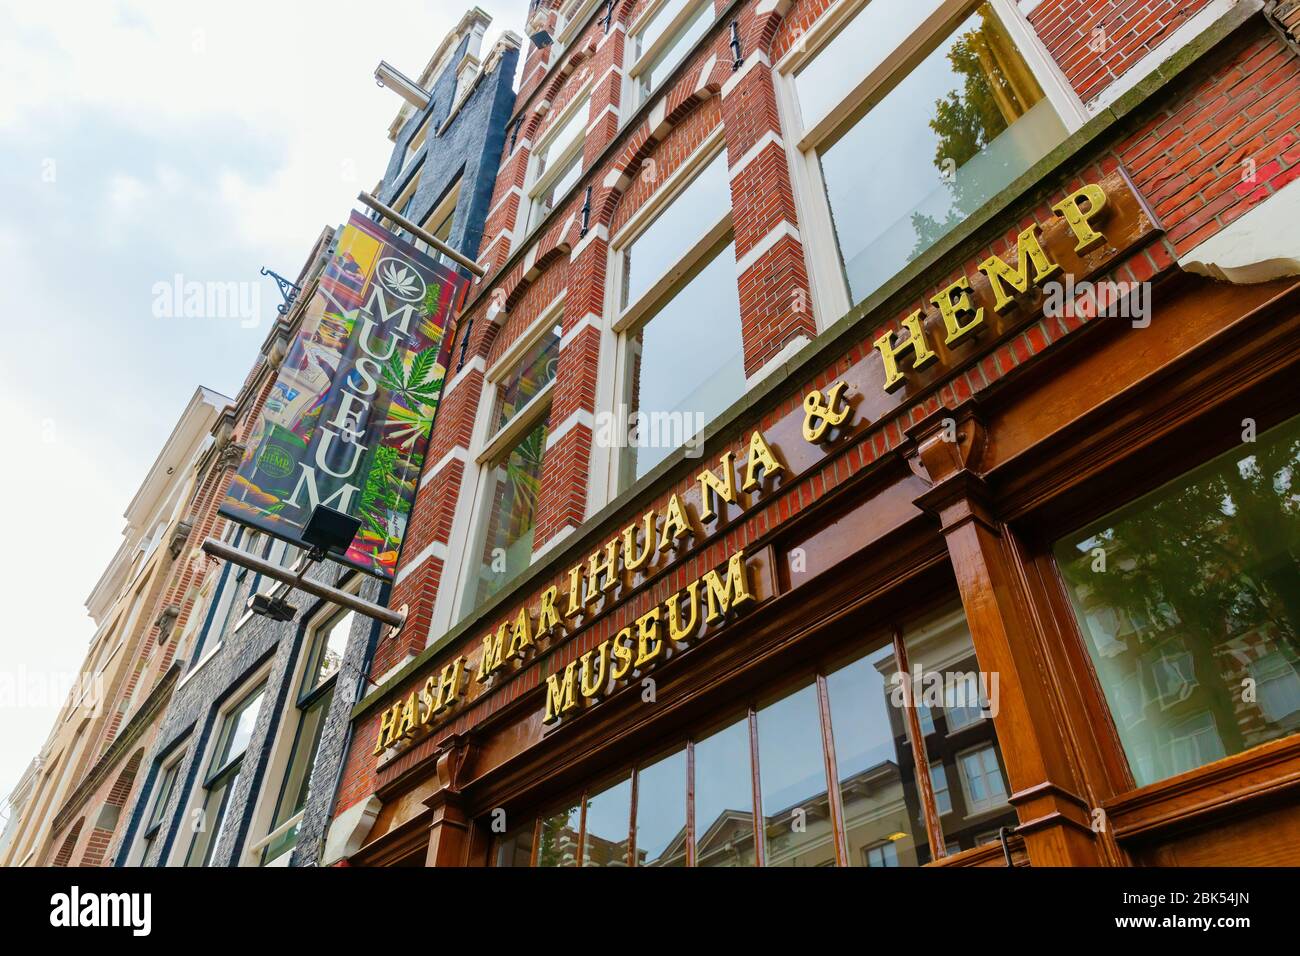 Amsterdam, Netherlands - October 28, 2019: Hash, Marihuana and Hemp Museum in Amsterdam. It offers information to historical and modern uses of cannab Stock Photo